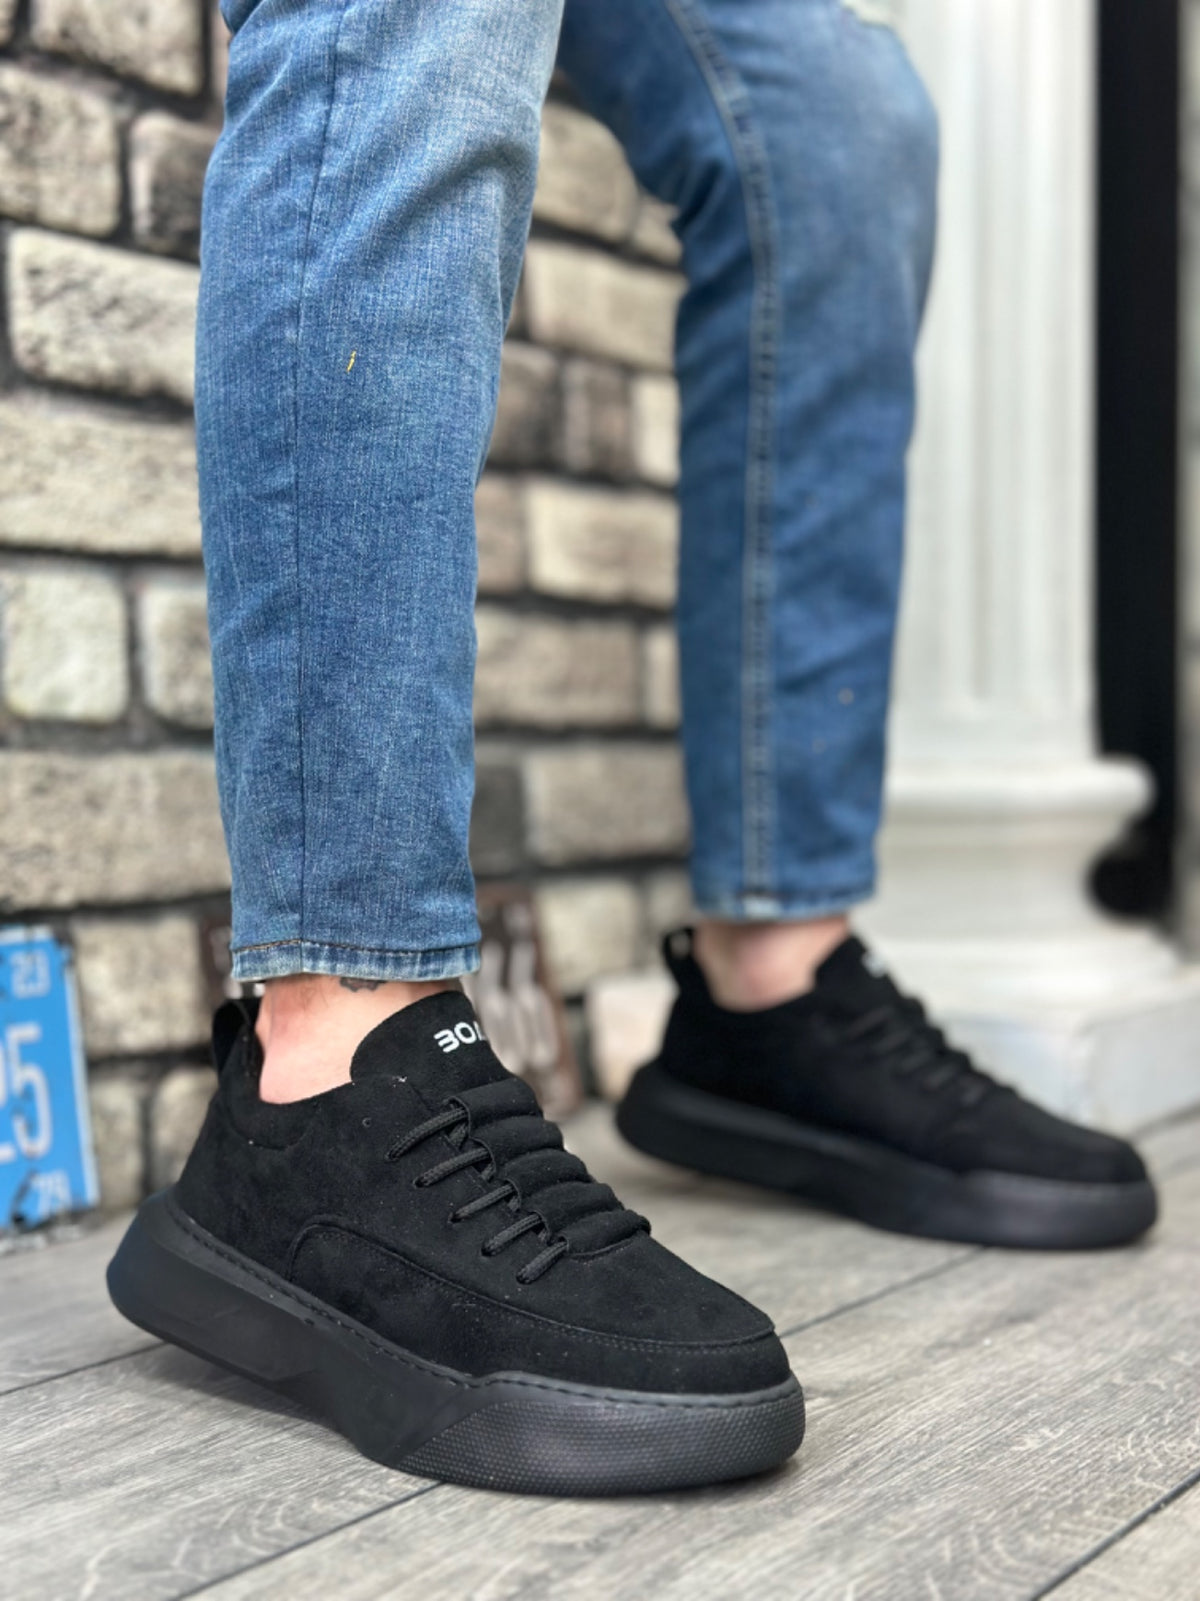 BA0332 Ladder Pattern Lace-Up Men's High Sole Black Suede Black Sole Sports Shoes - STREETMODE™